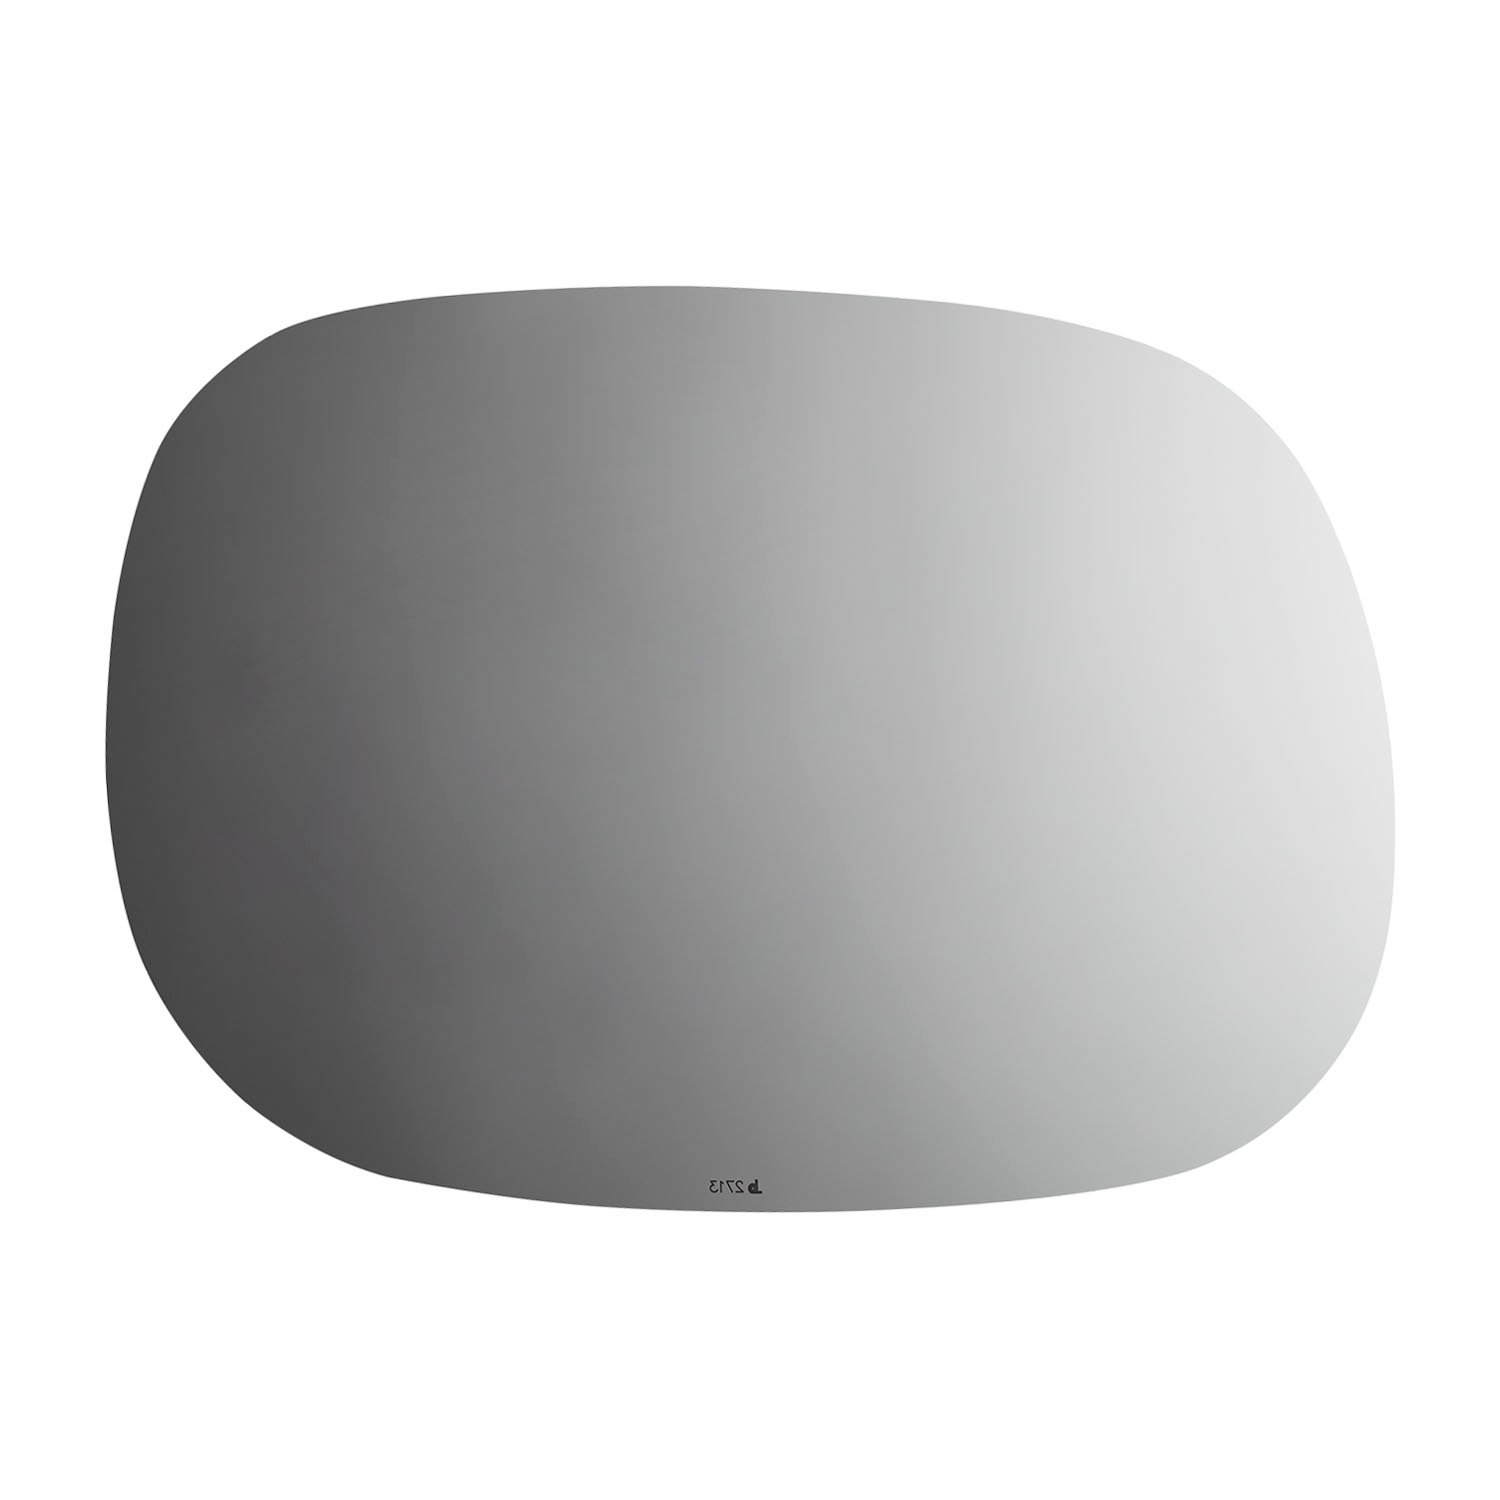 2713 SIDE VIEW MIRROR